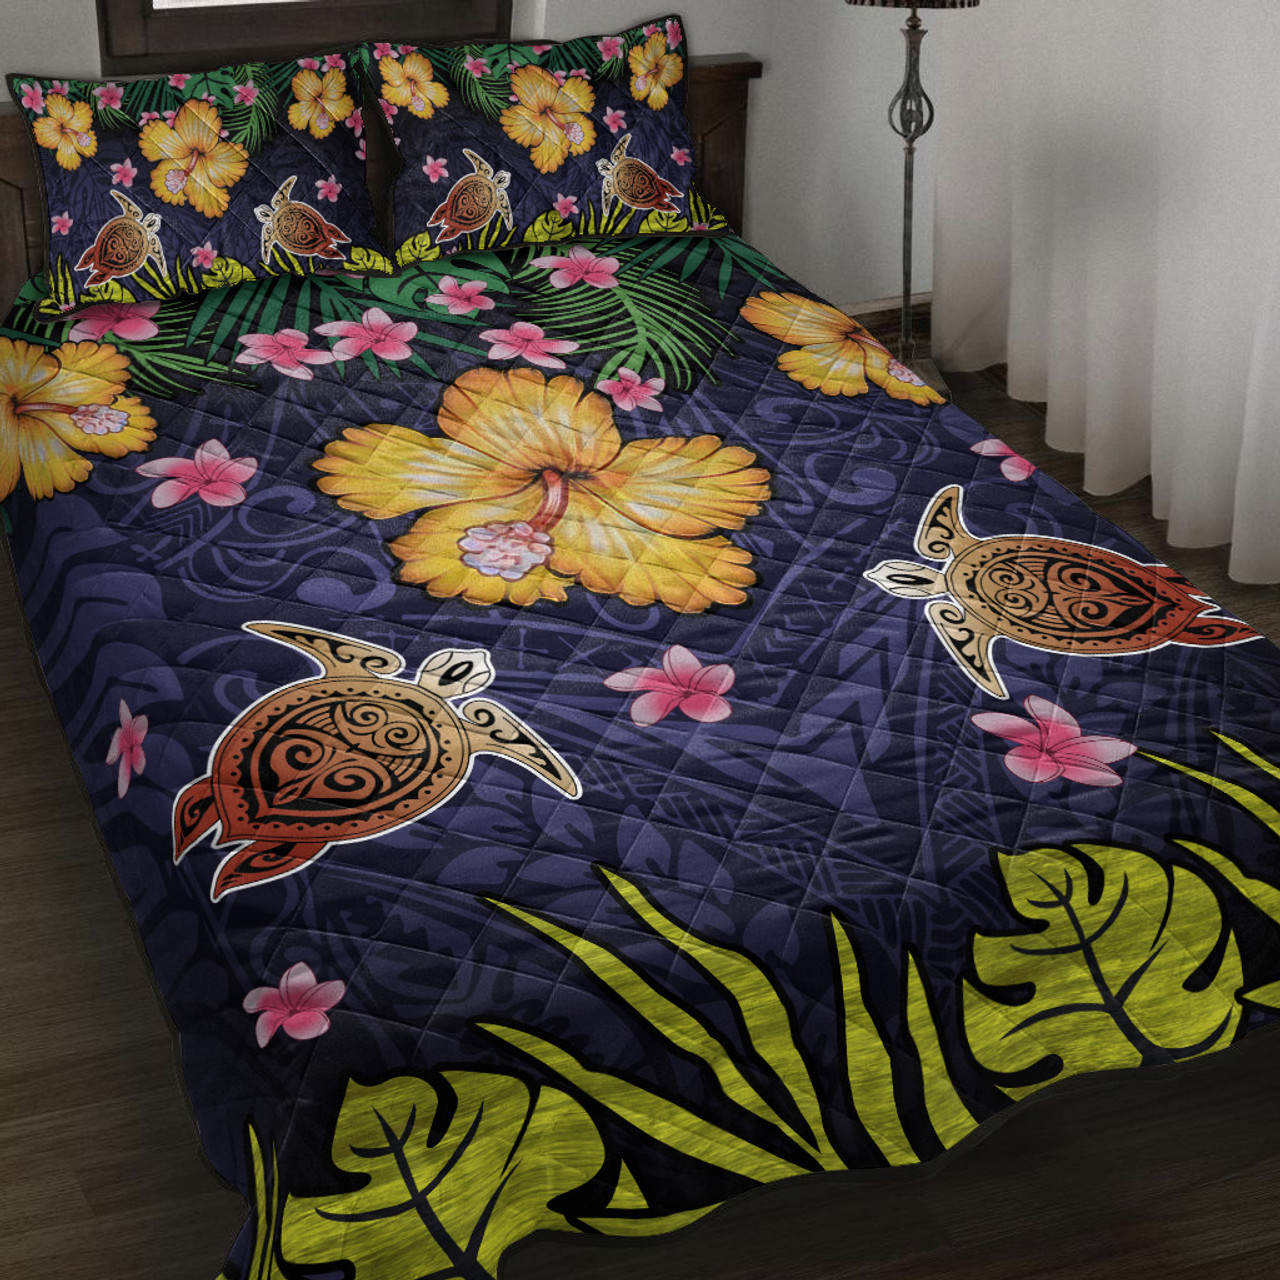 Hawaii Quilt Bed Set Polynesian Patterns Turtle Couple Hibiscus Plumeria Flowers